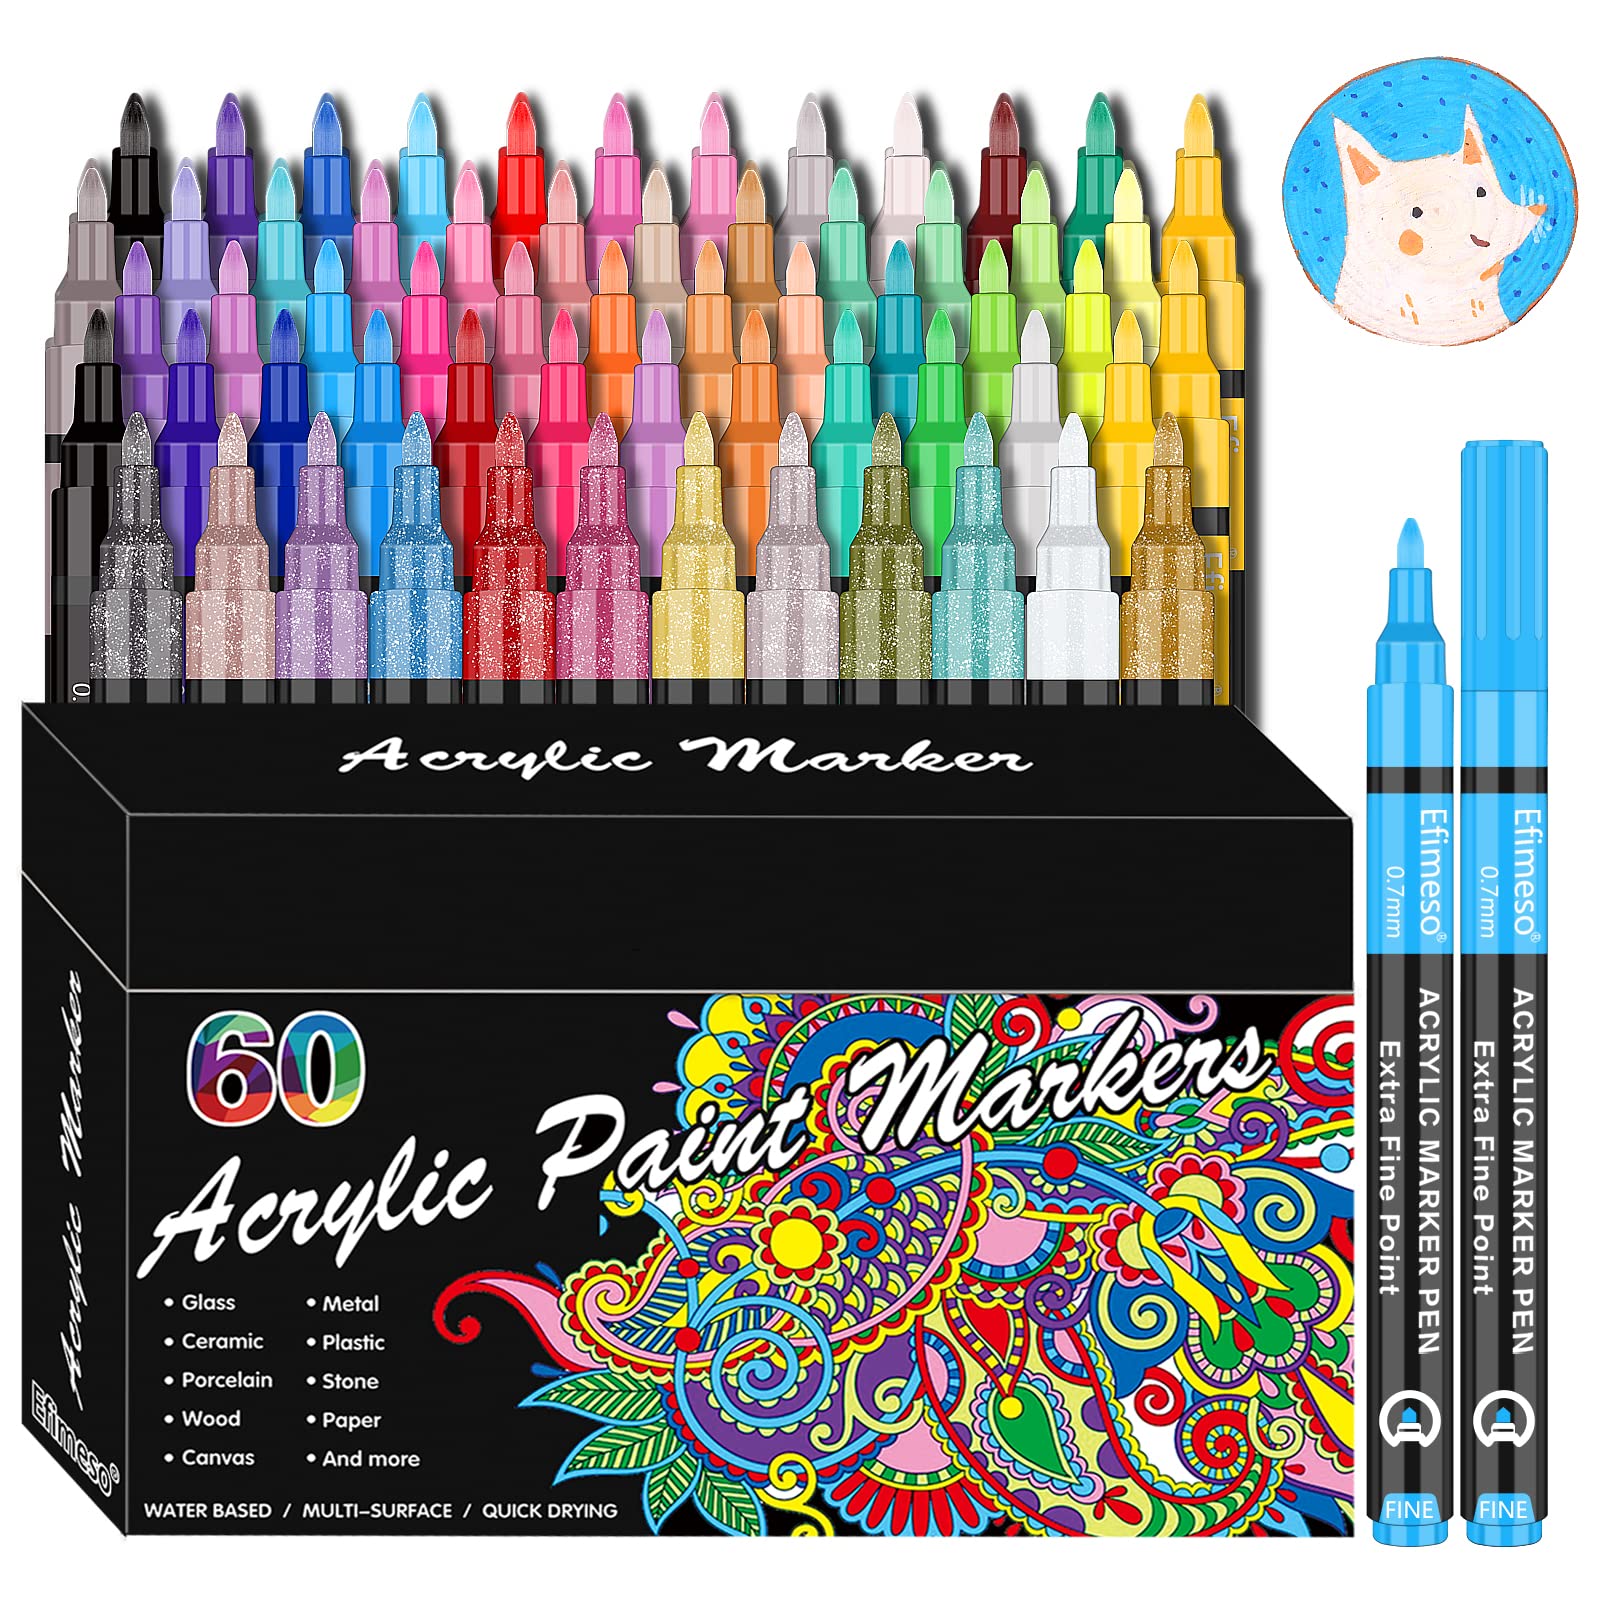 RESTLY Acrylic Paint Pens 60 Colors Acrylic Paint Marker 0.7mm Extra Fine  Paint Pens for Canvas Rock Painting Wood Glass Metal Ceramic stone